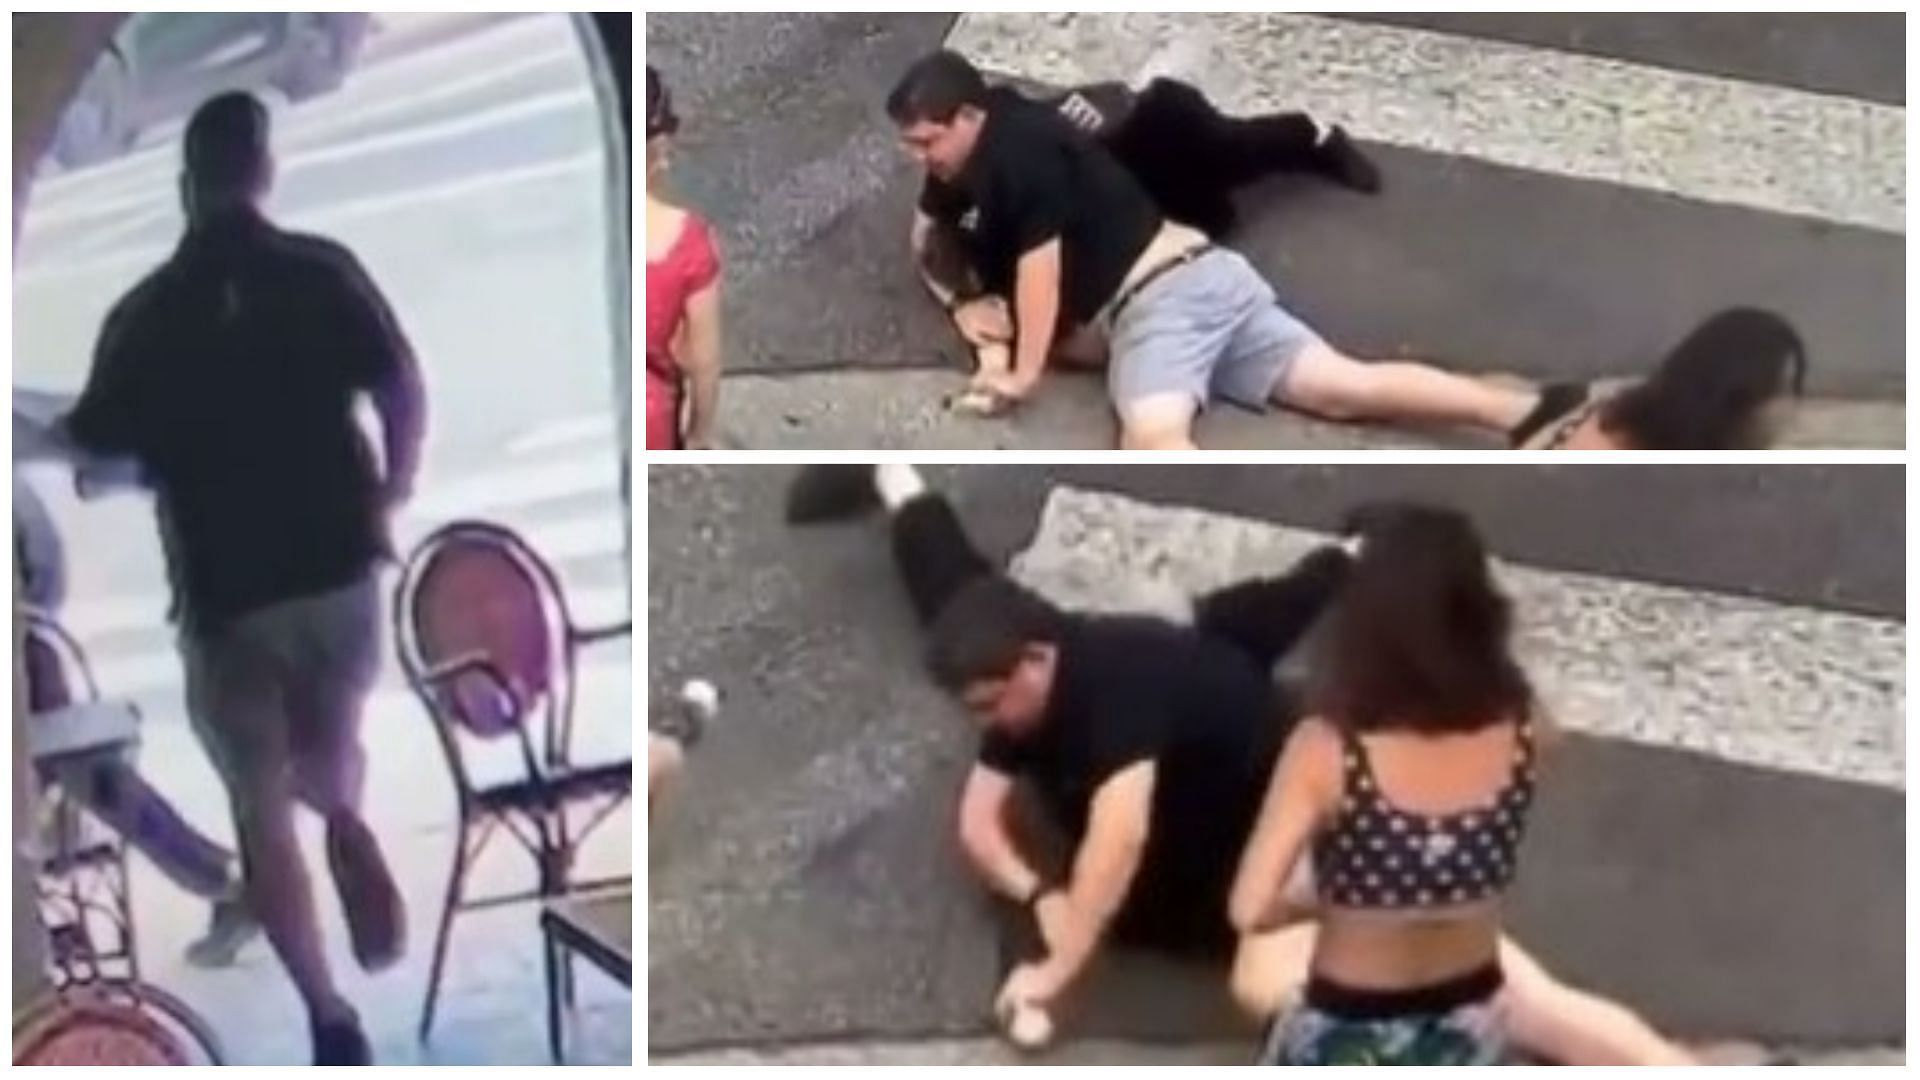 Owner seen chasing the thief out of the restaurant and tackling to the ground (Screengrabs from video footage)